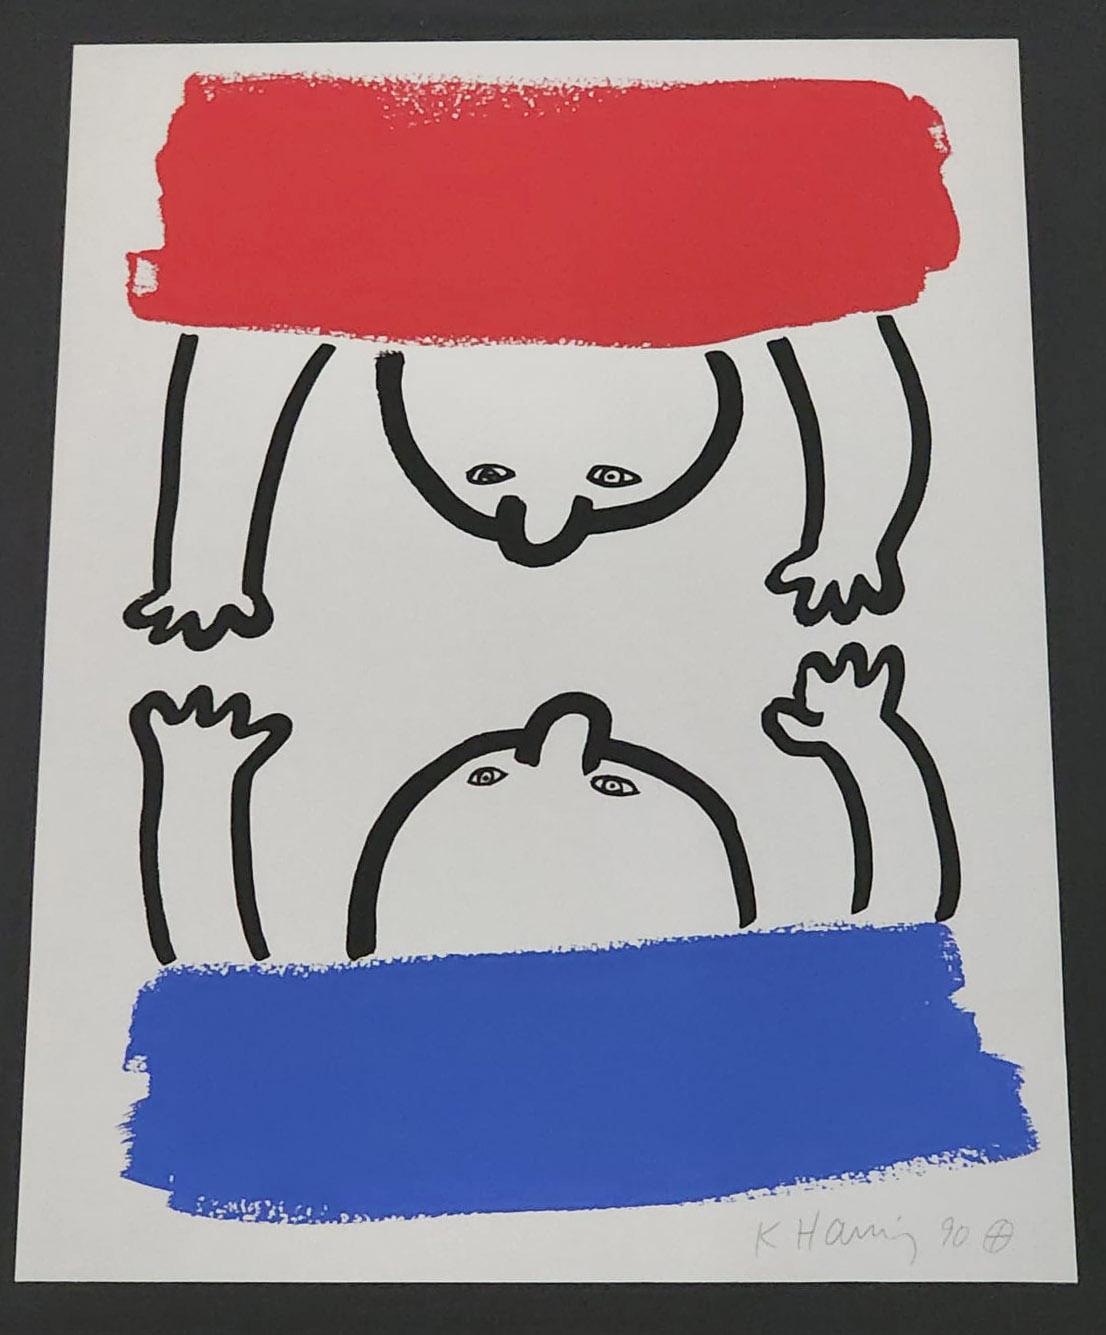 KEITH HARING 'THE STORY OF RED AND BLUE - XVI', 1989, SIGNED & NUMBERED - Print by Keith Haring